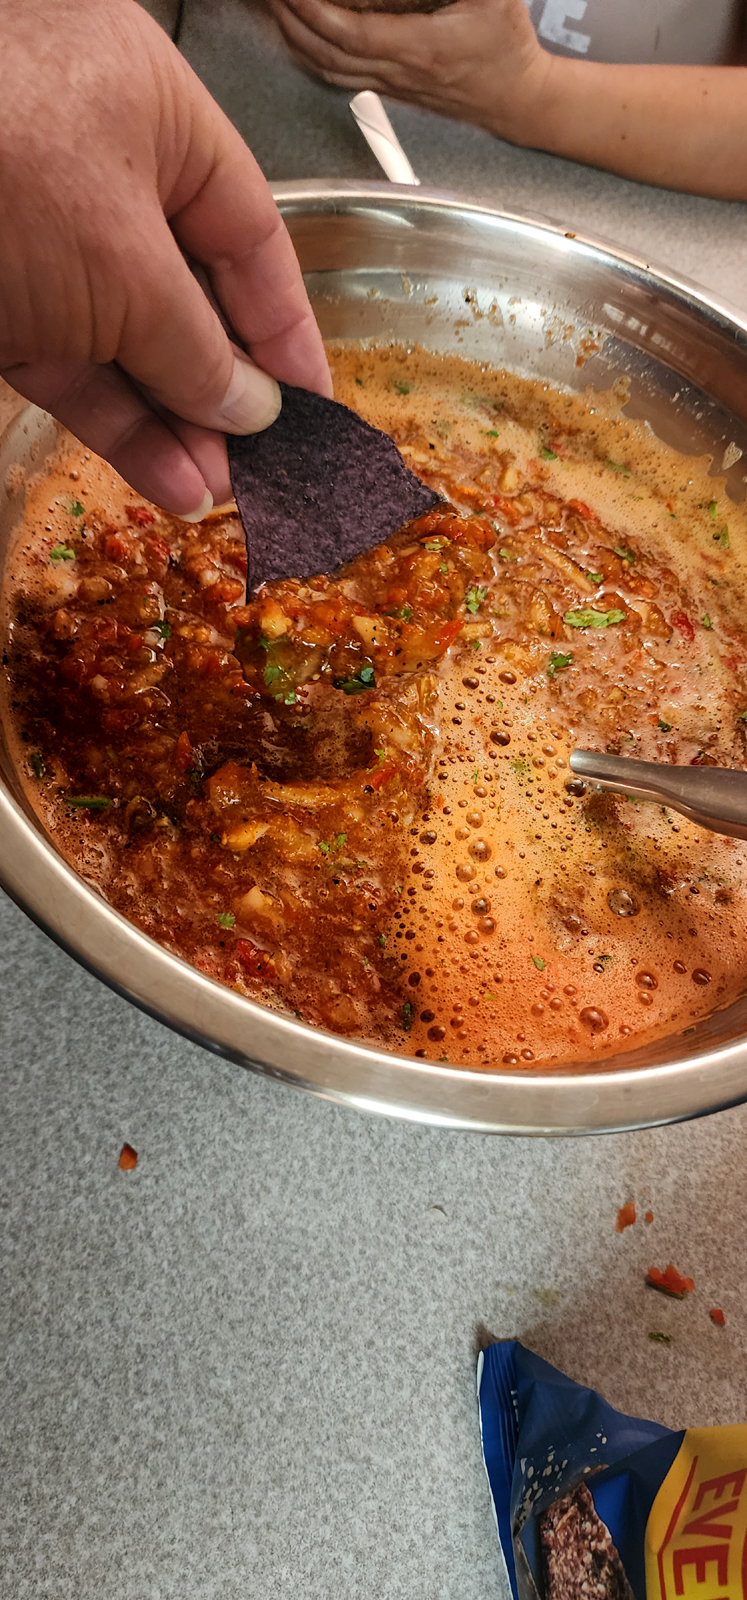 Dipping a chip in the mixing bowl of finished salsa